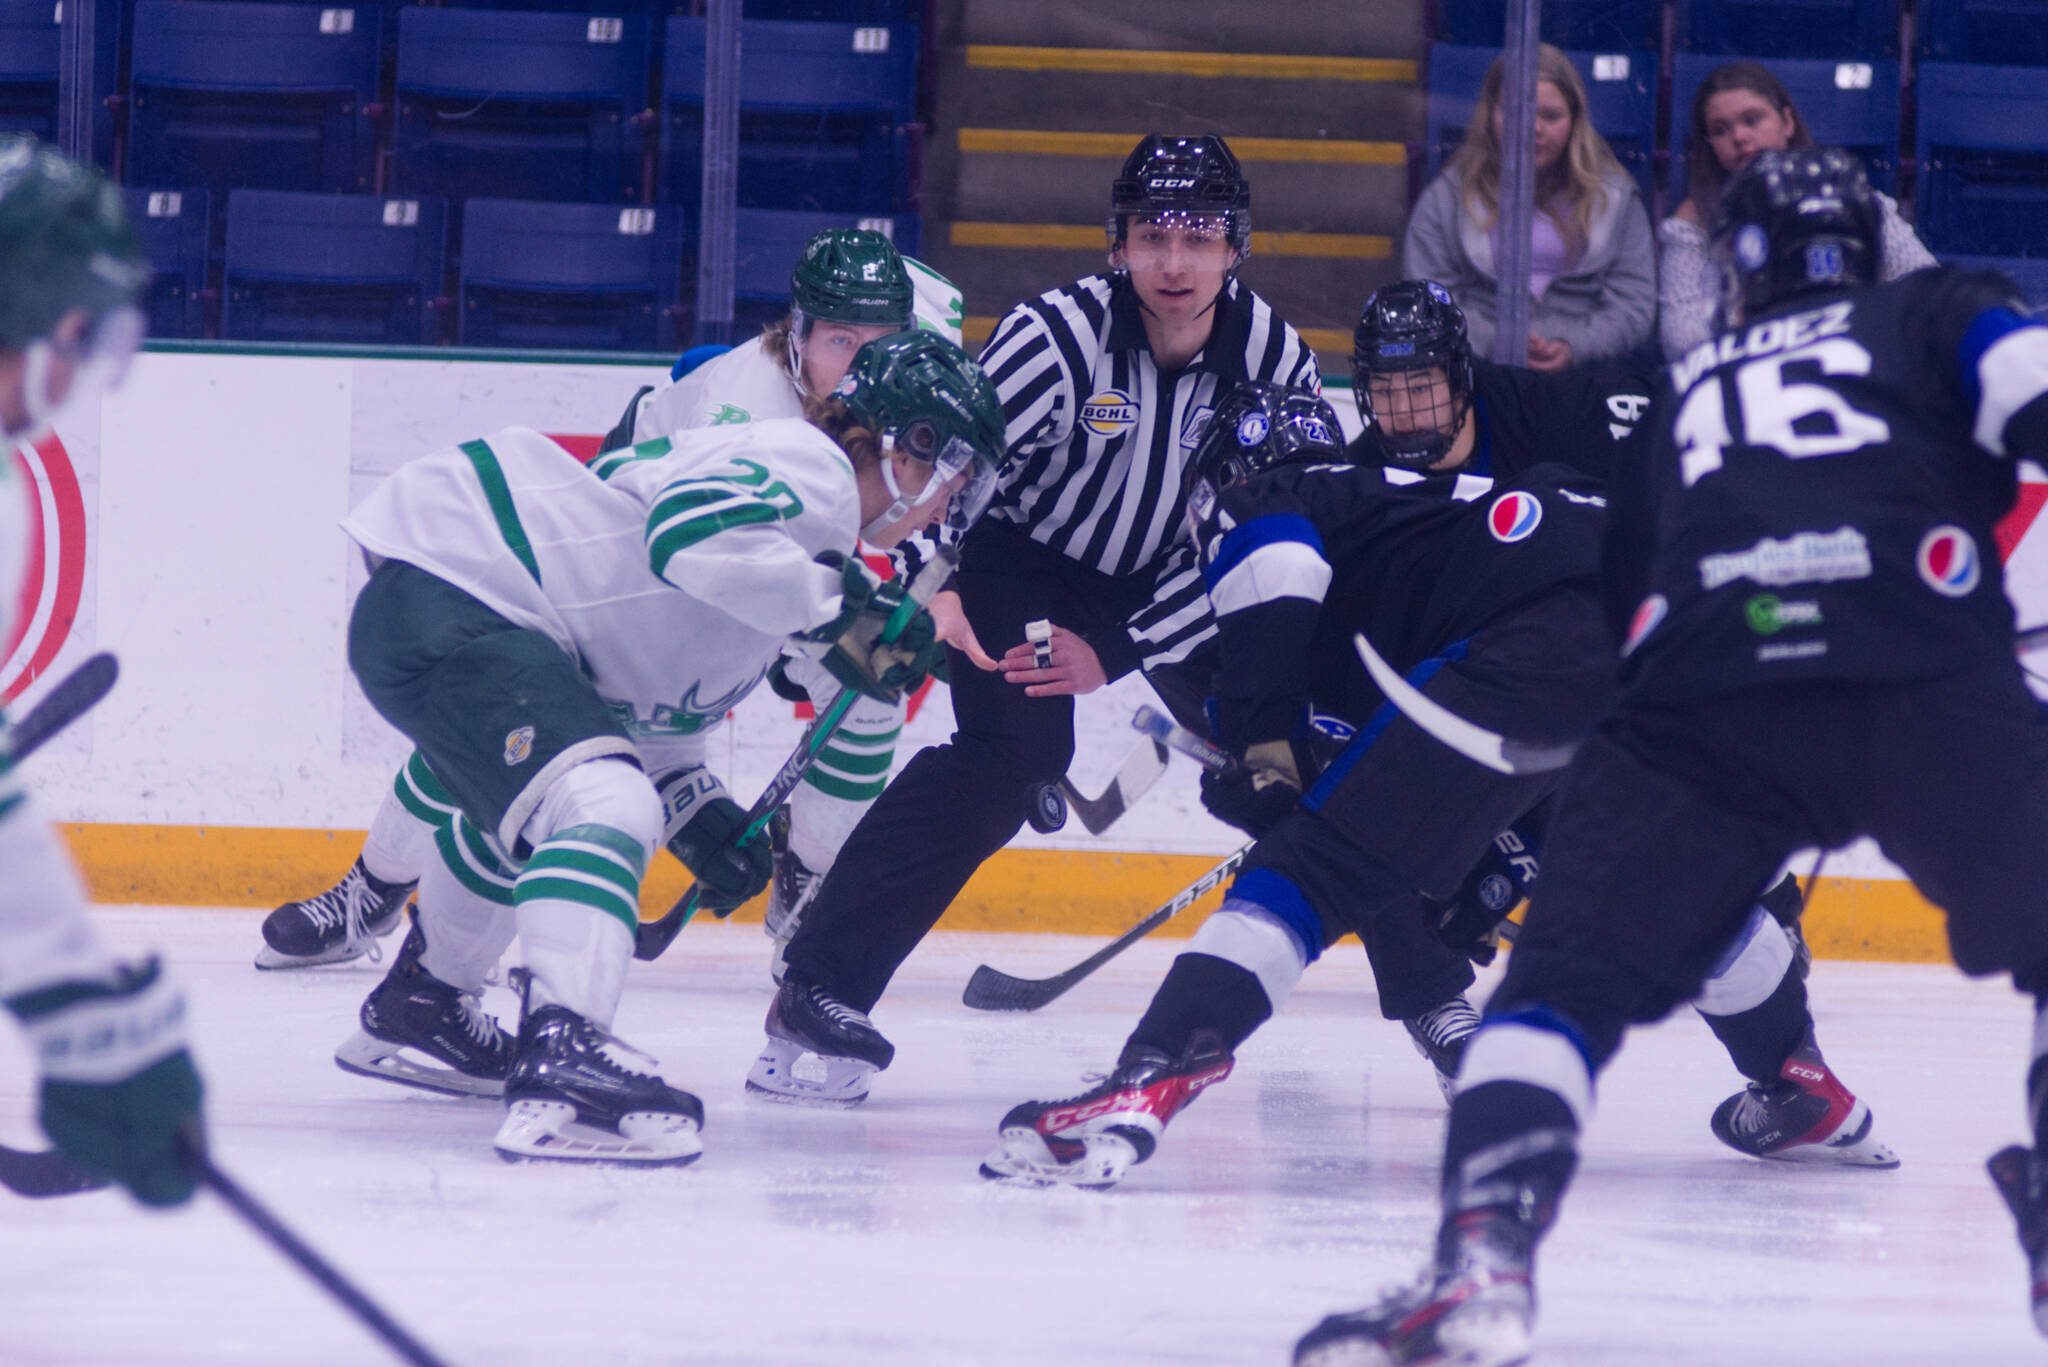 The Cranbrook Bucks fell 4-2 to the Wenatchee Wild on Wednesday night, and are now one game from elimination from the BCHL playoffs. Game 5 goes down on Friday at Western Financial Place in Cranbrook. Photo taken from Game 2 at Western Financial Place by Trevor Crawley.